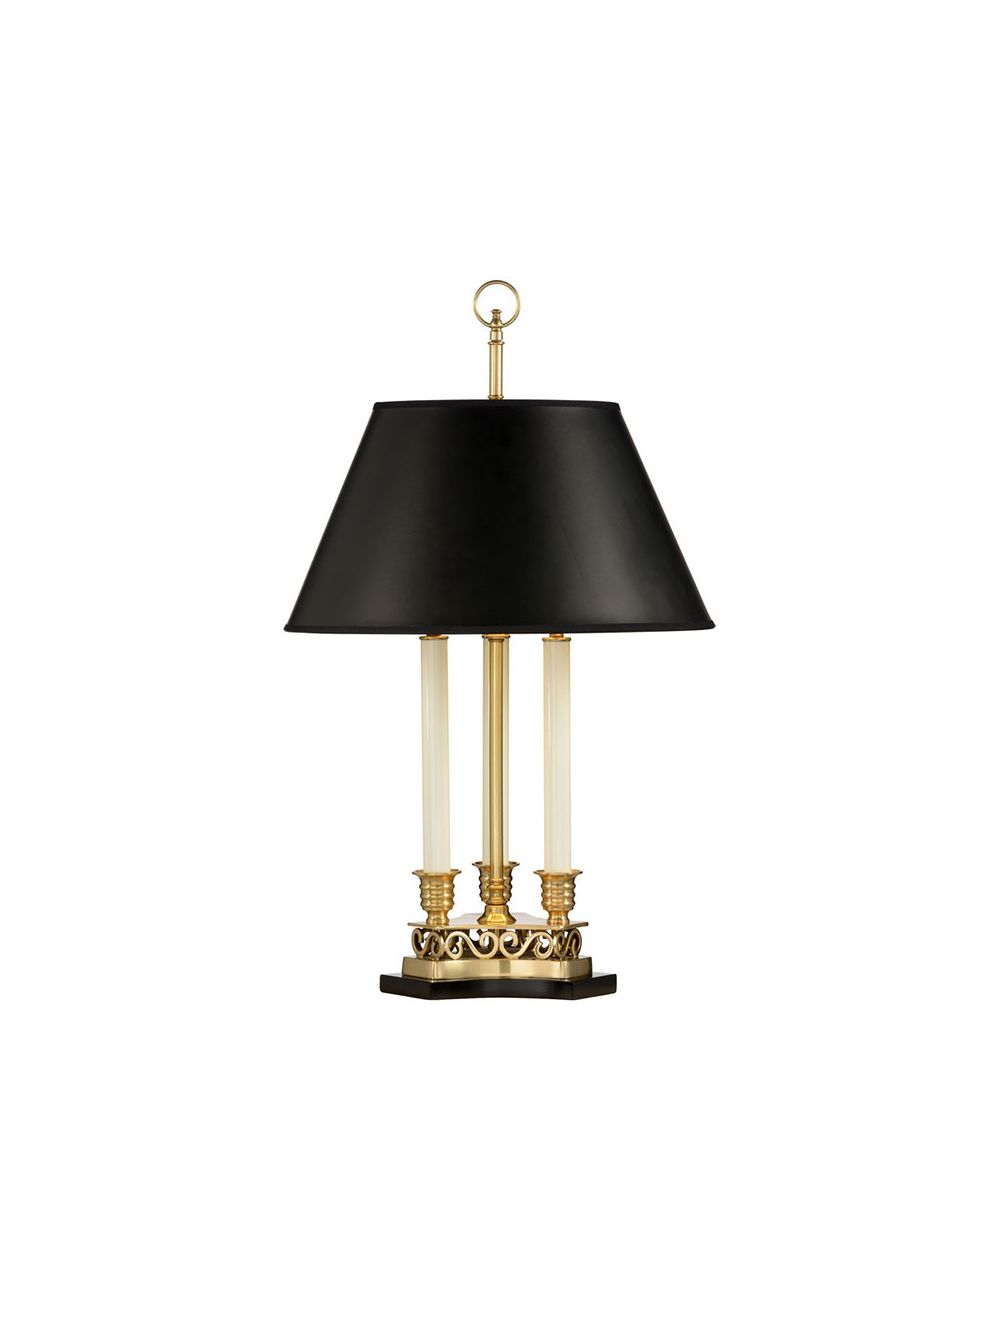 Triple Candlestick Lamp Black Shade, Antique Brass Table Lamp With Black Shade